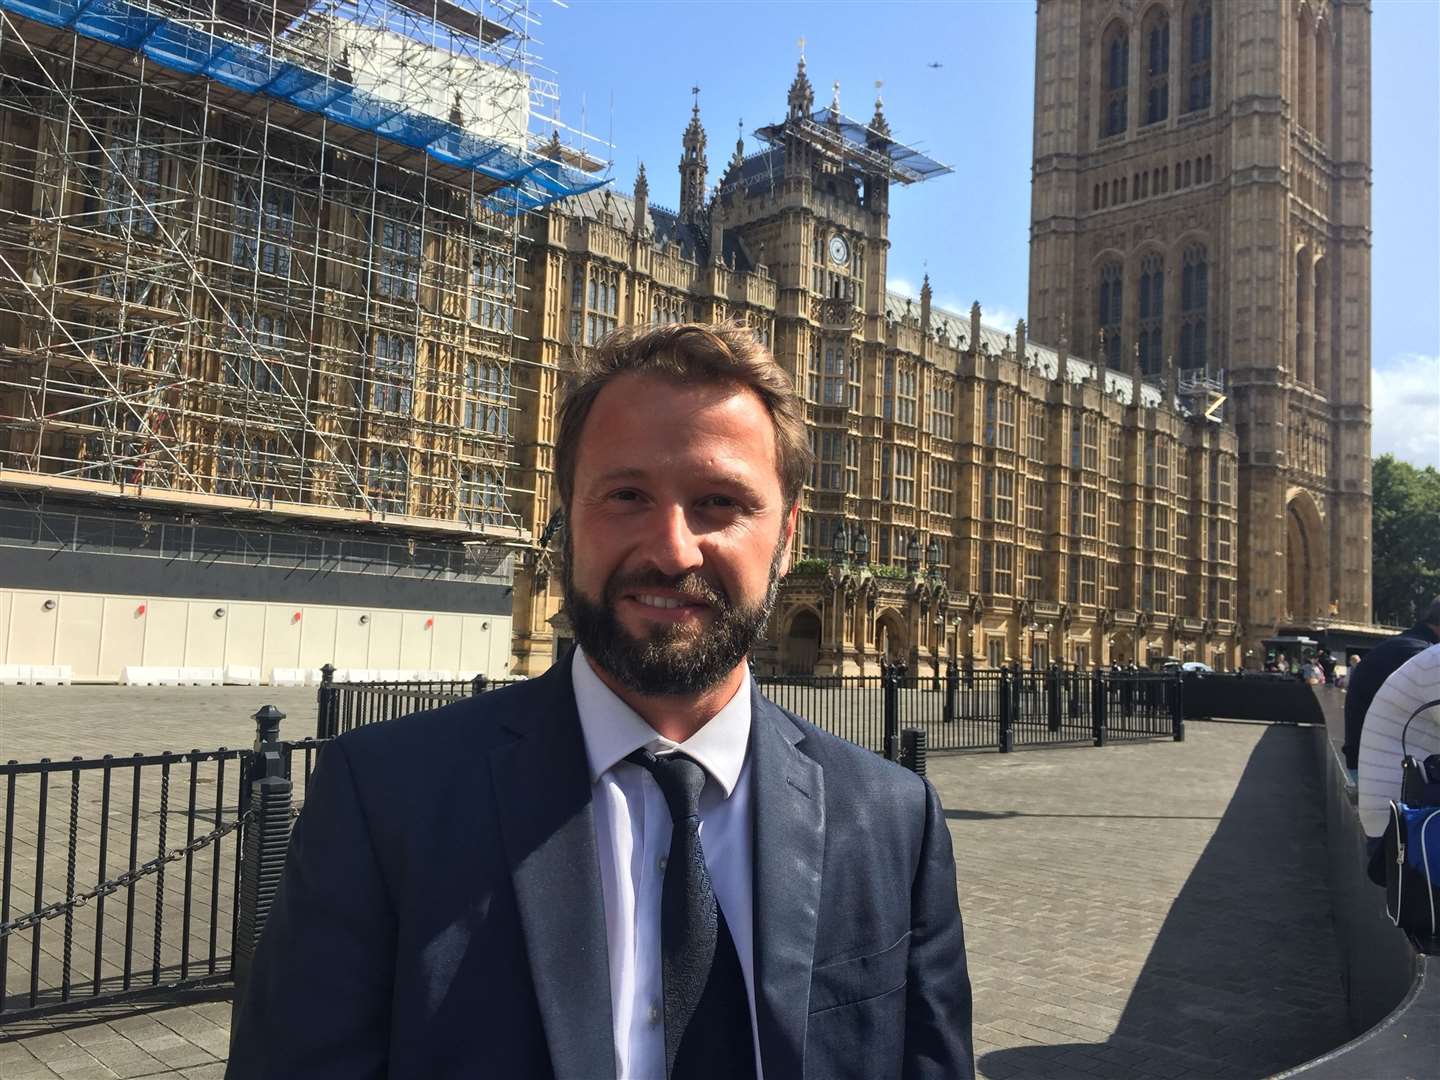 Owen Prew is the Brexit Party candidate for Canterbury and Whitstable